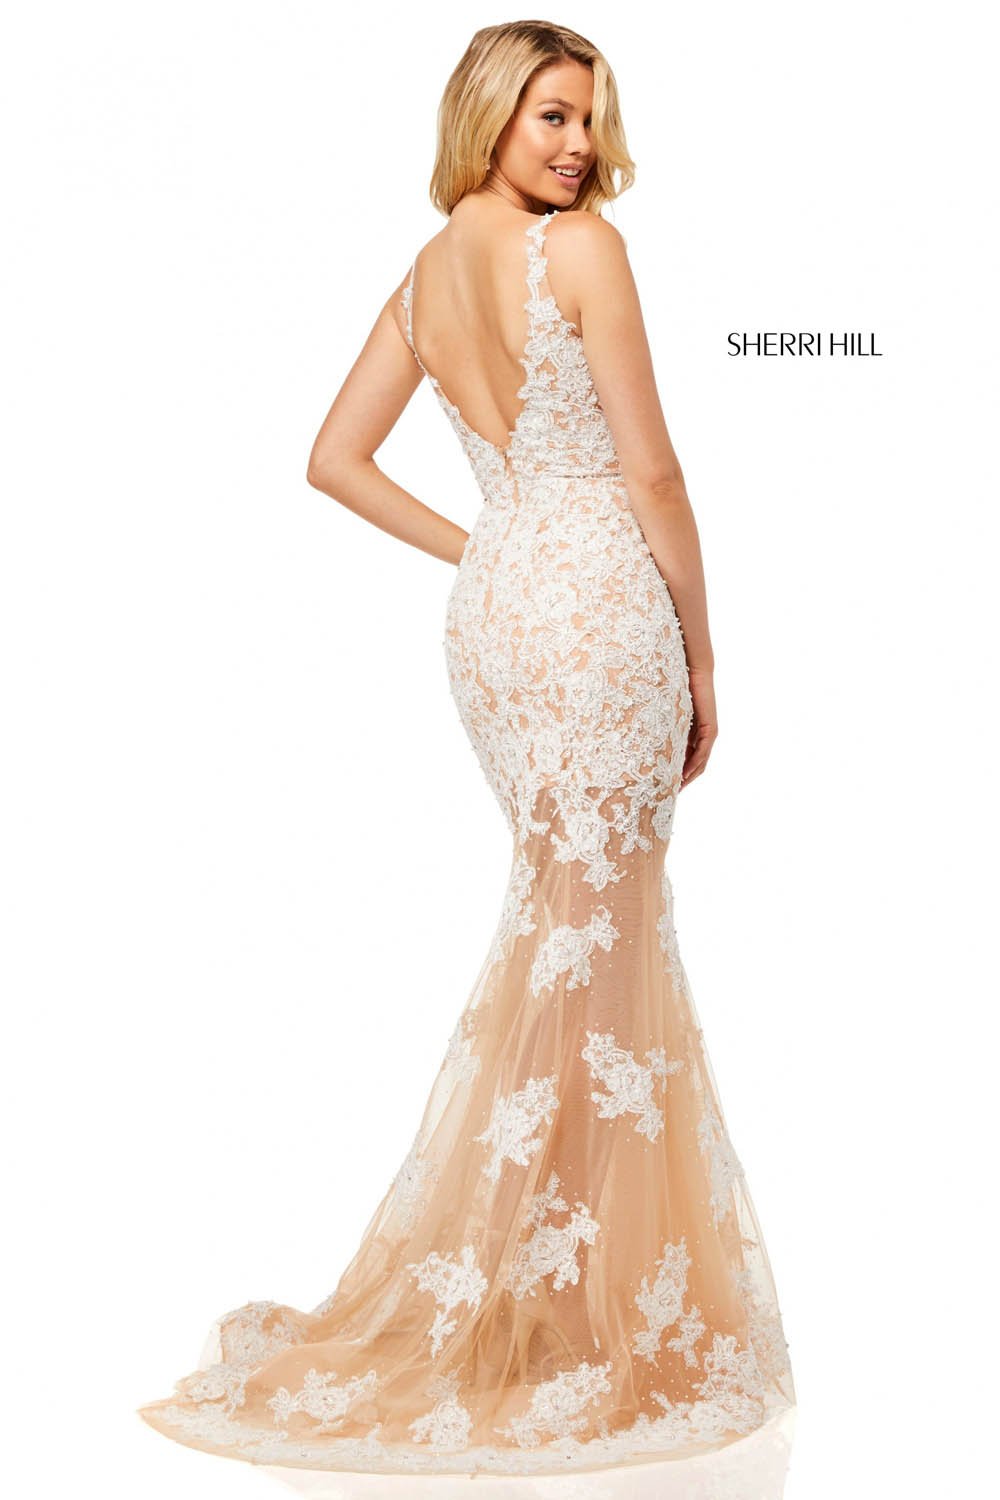 Sherri Hill 52552 dress images in these colors: Nude Ivory.